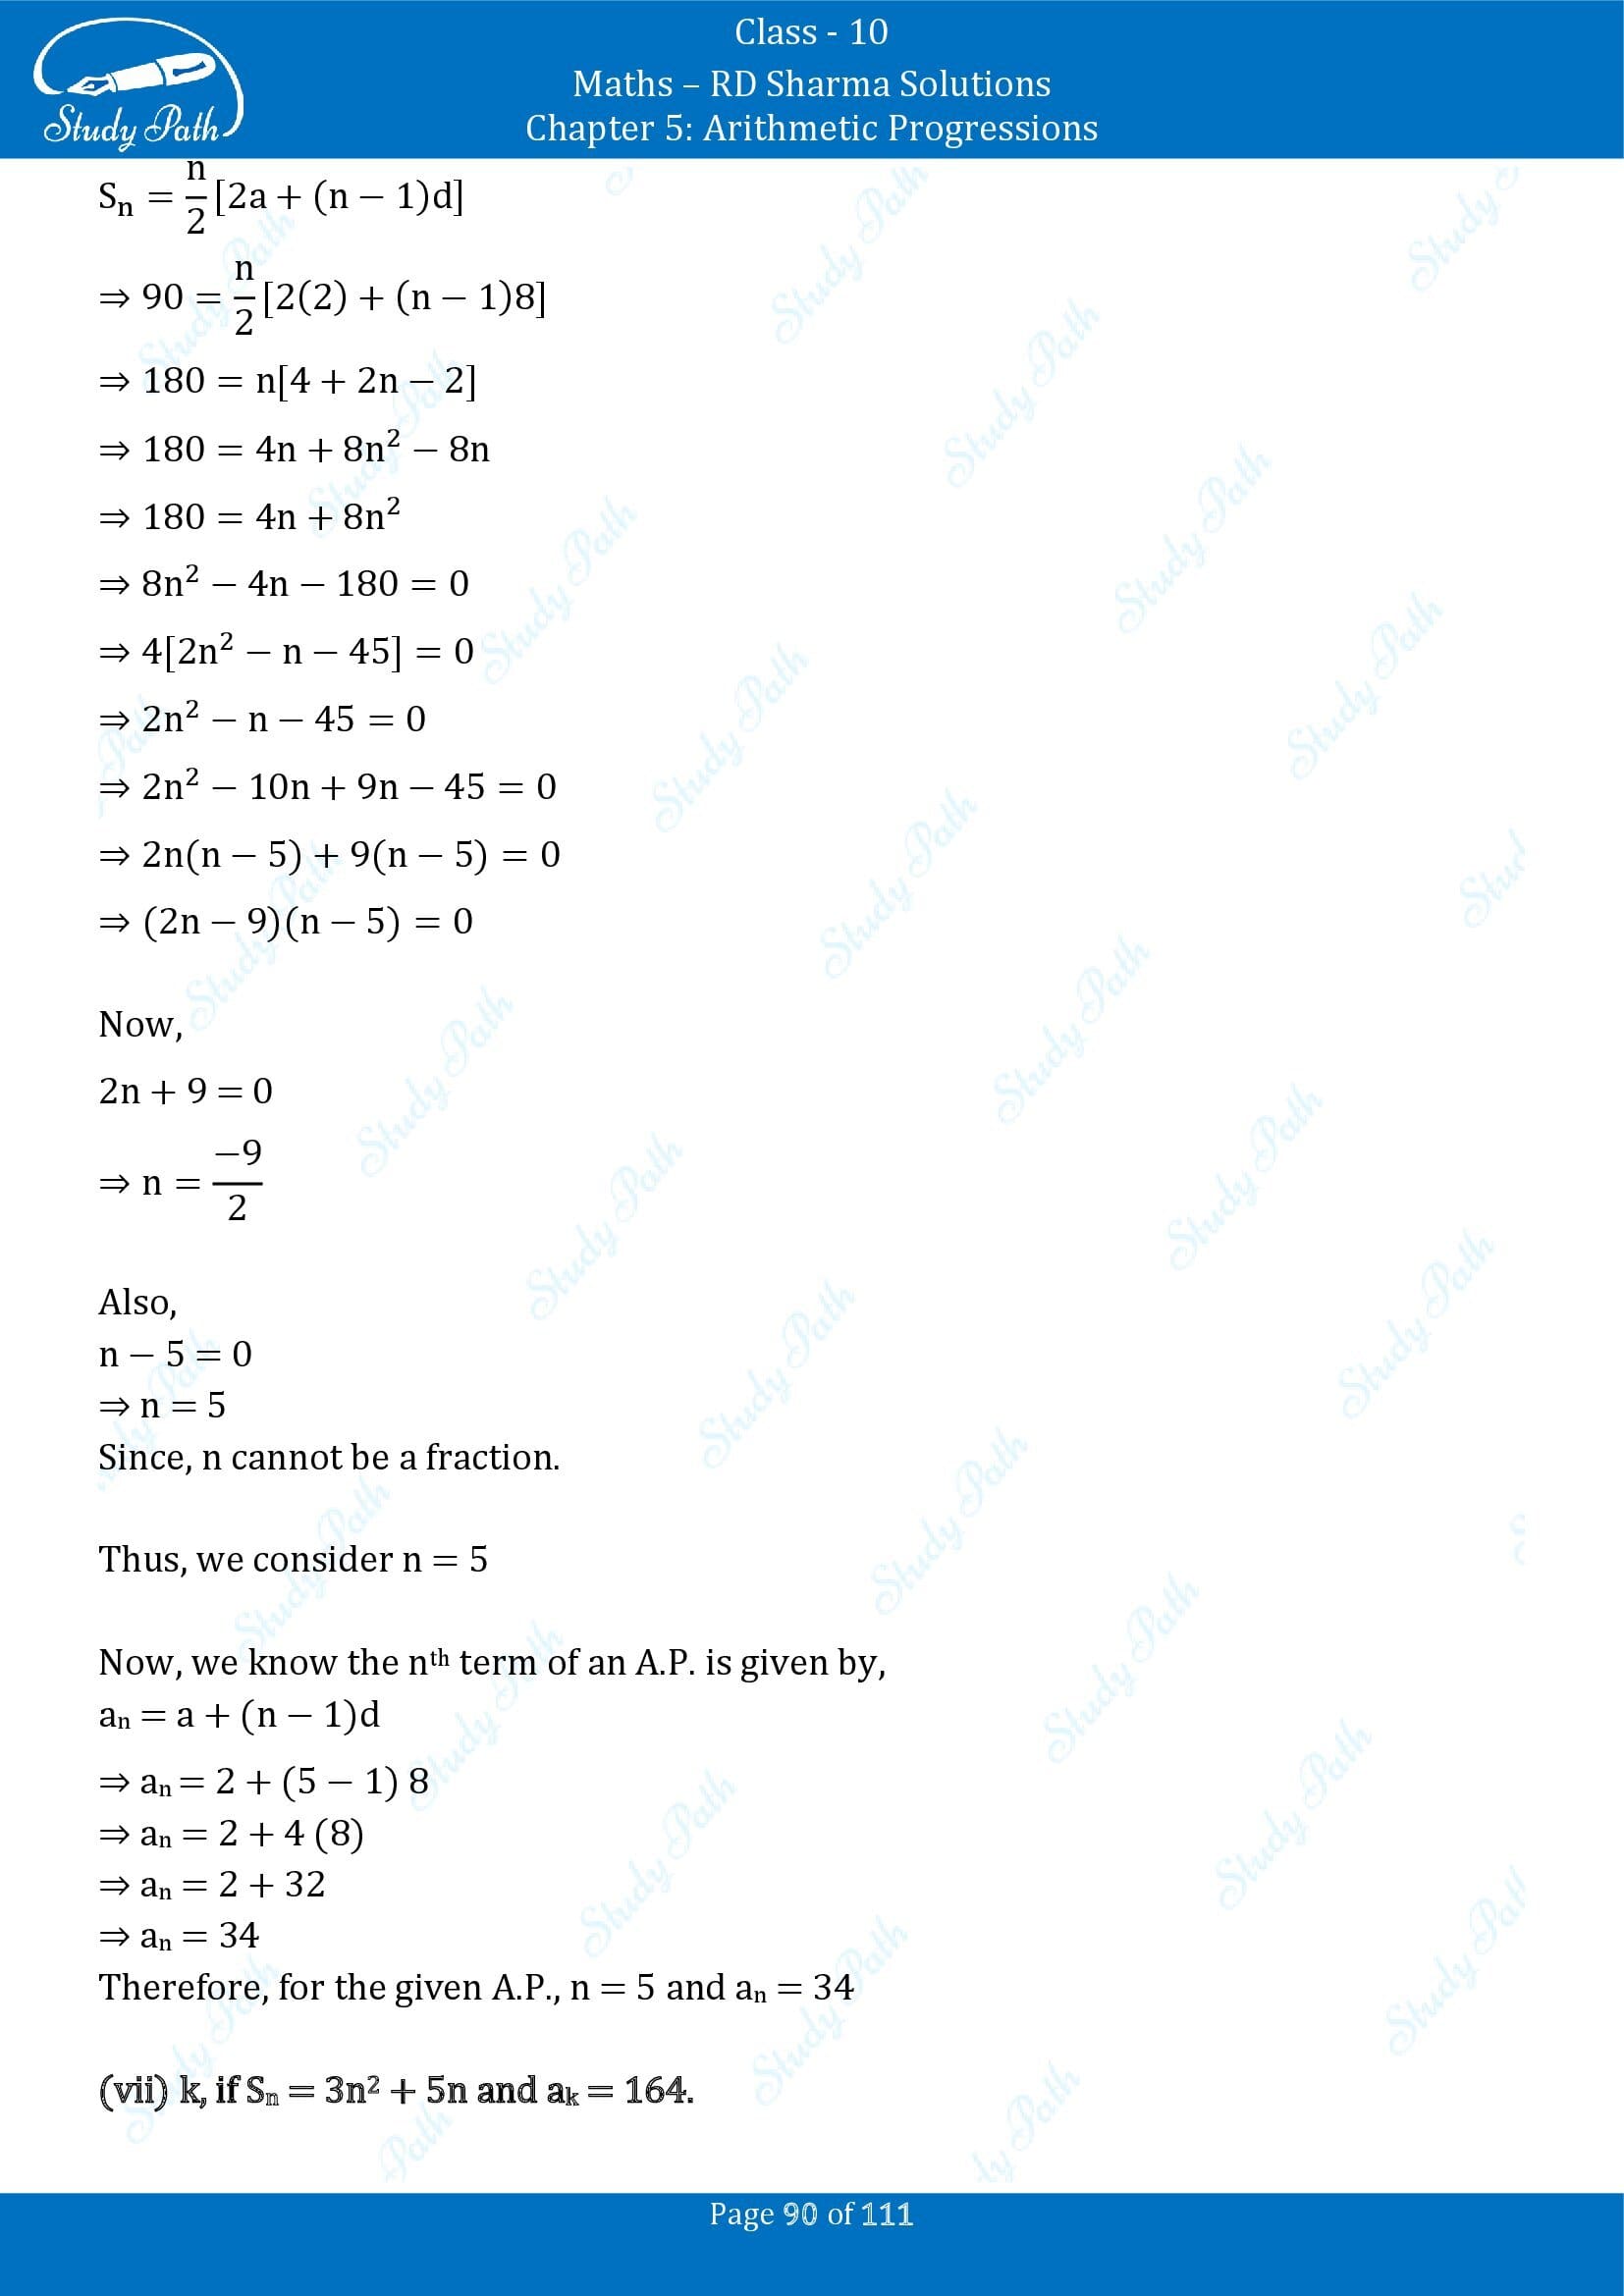 RD Sharma Solutions Class 10 Chapter 5 Arithmetic Progressions Exercise 5.6 00090